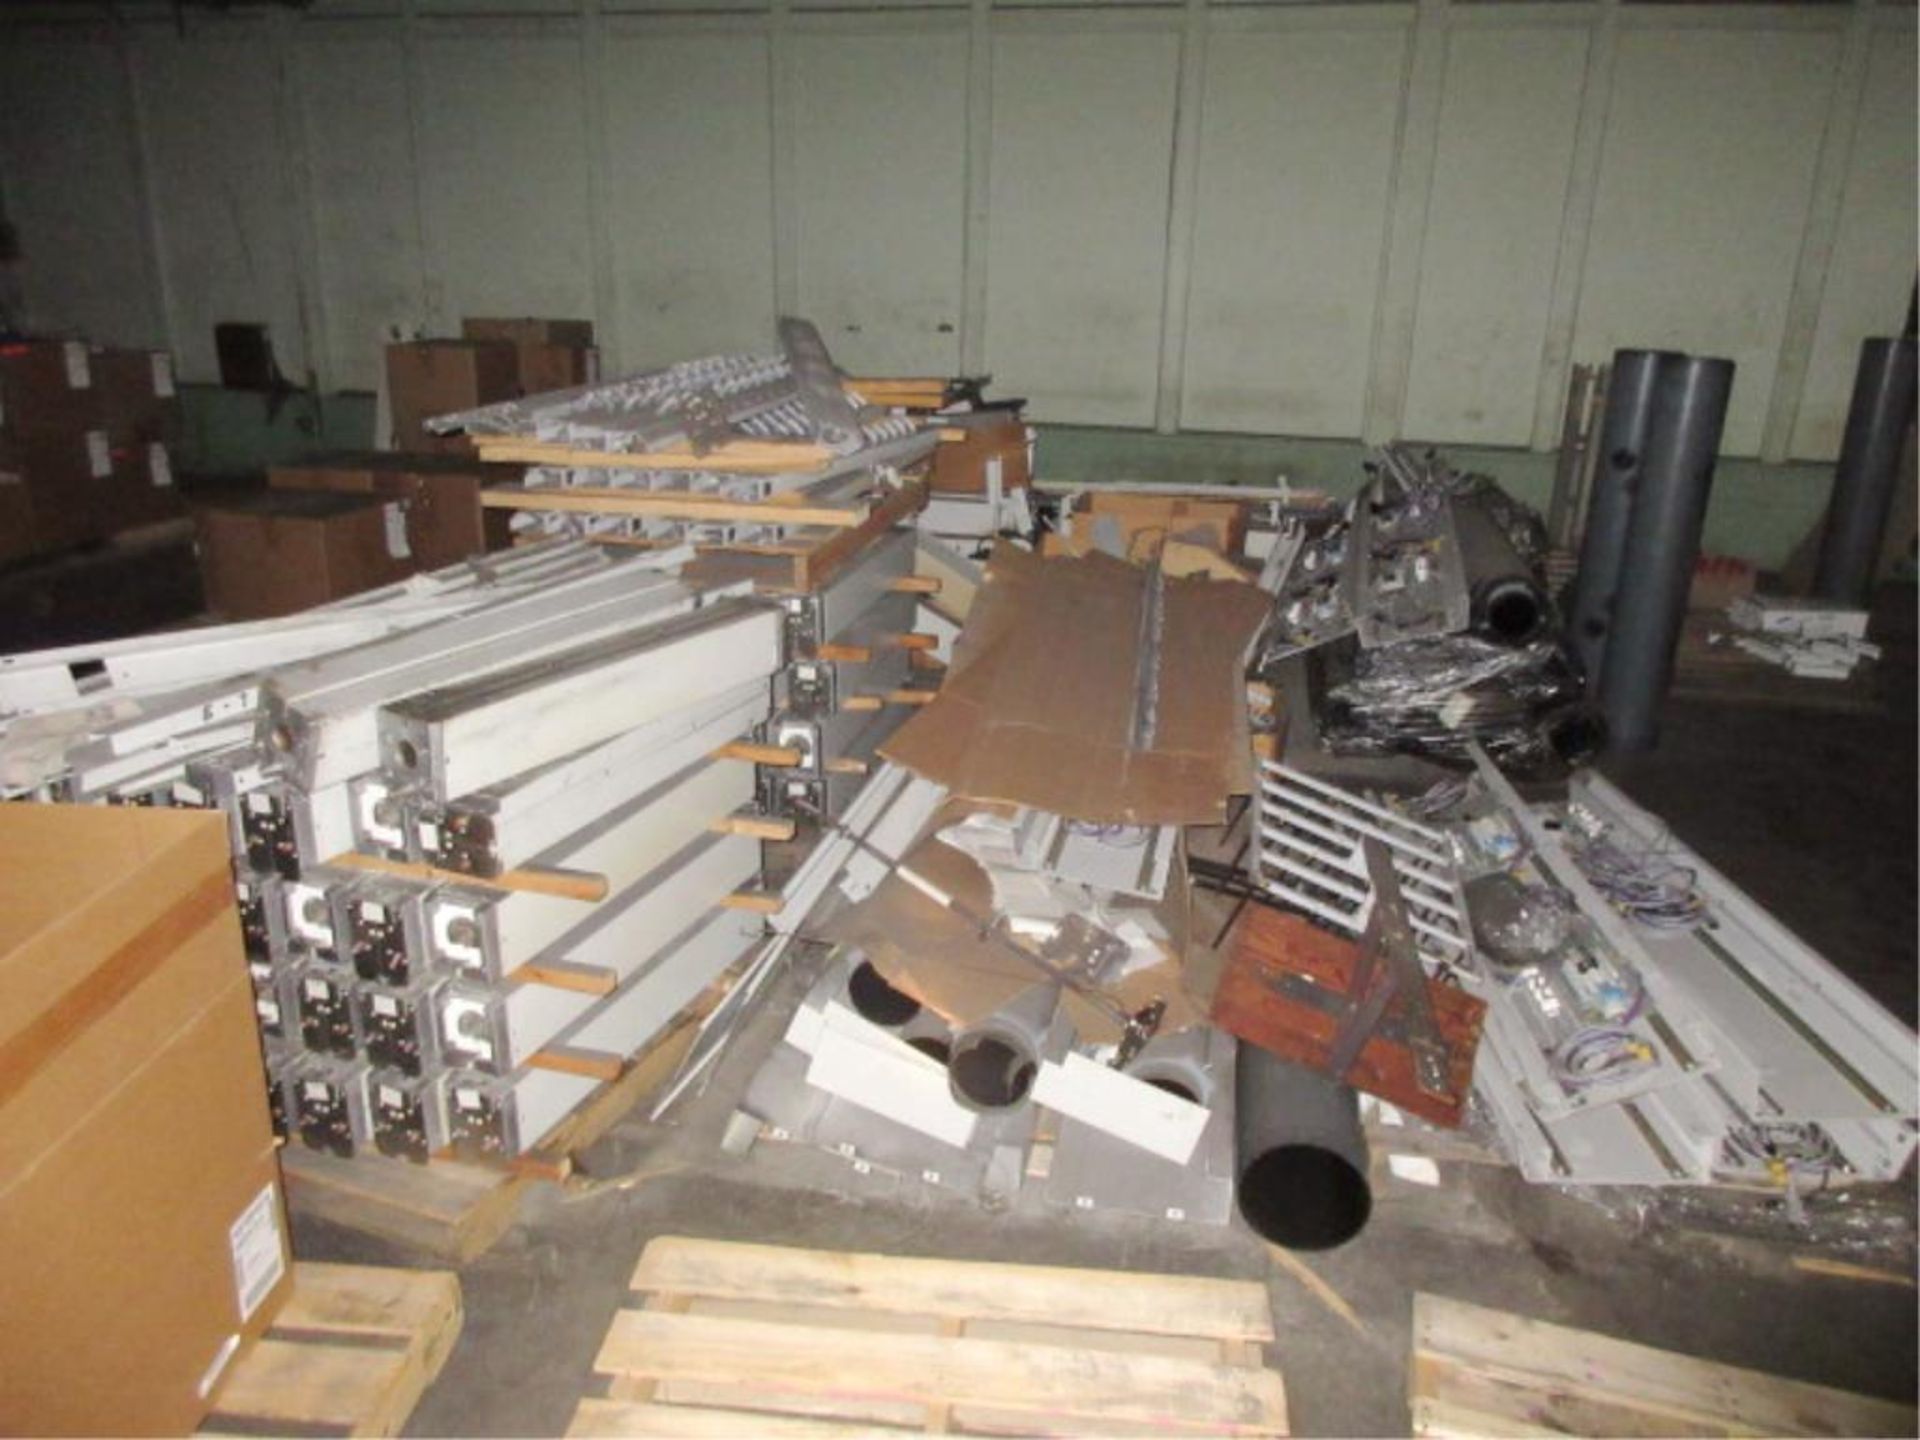 Lot ICBT Texturing Machine Parts. HIT# 2179398. whse 3. Asset Located at 10 Valley St, Pulaski, VA - Image 5 of 6